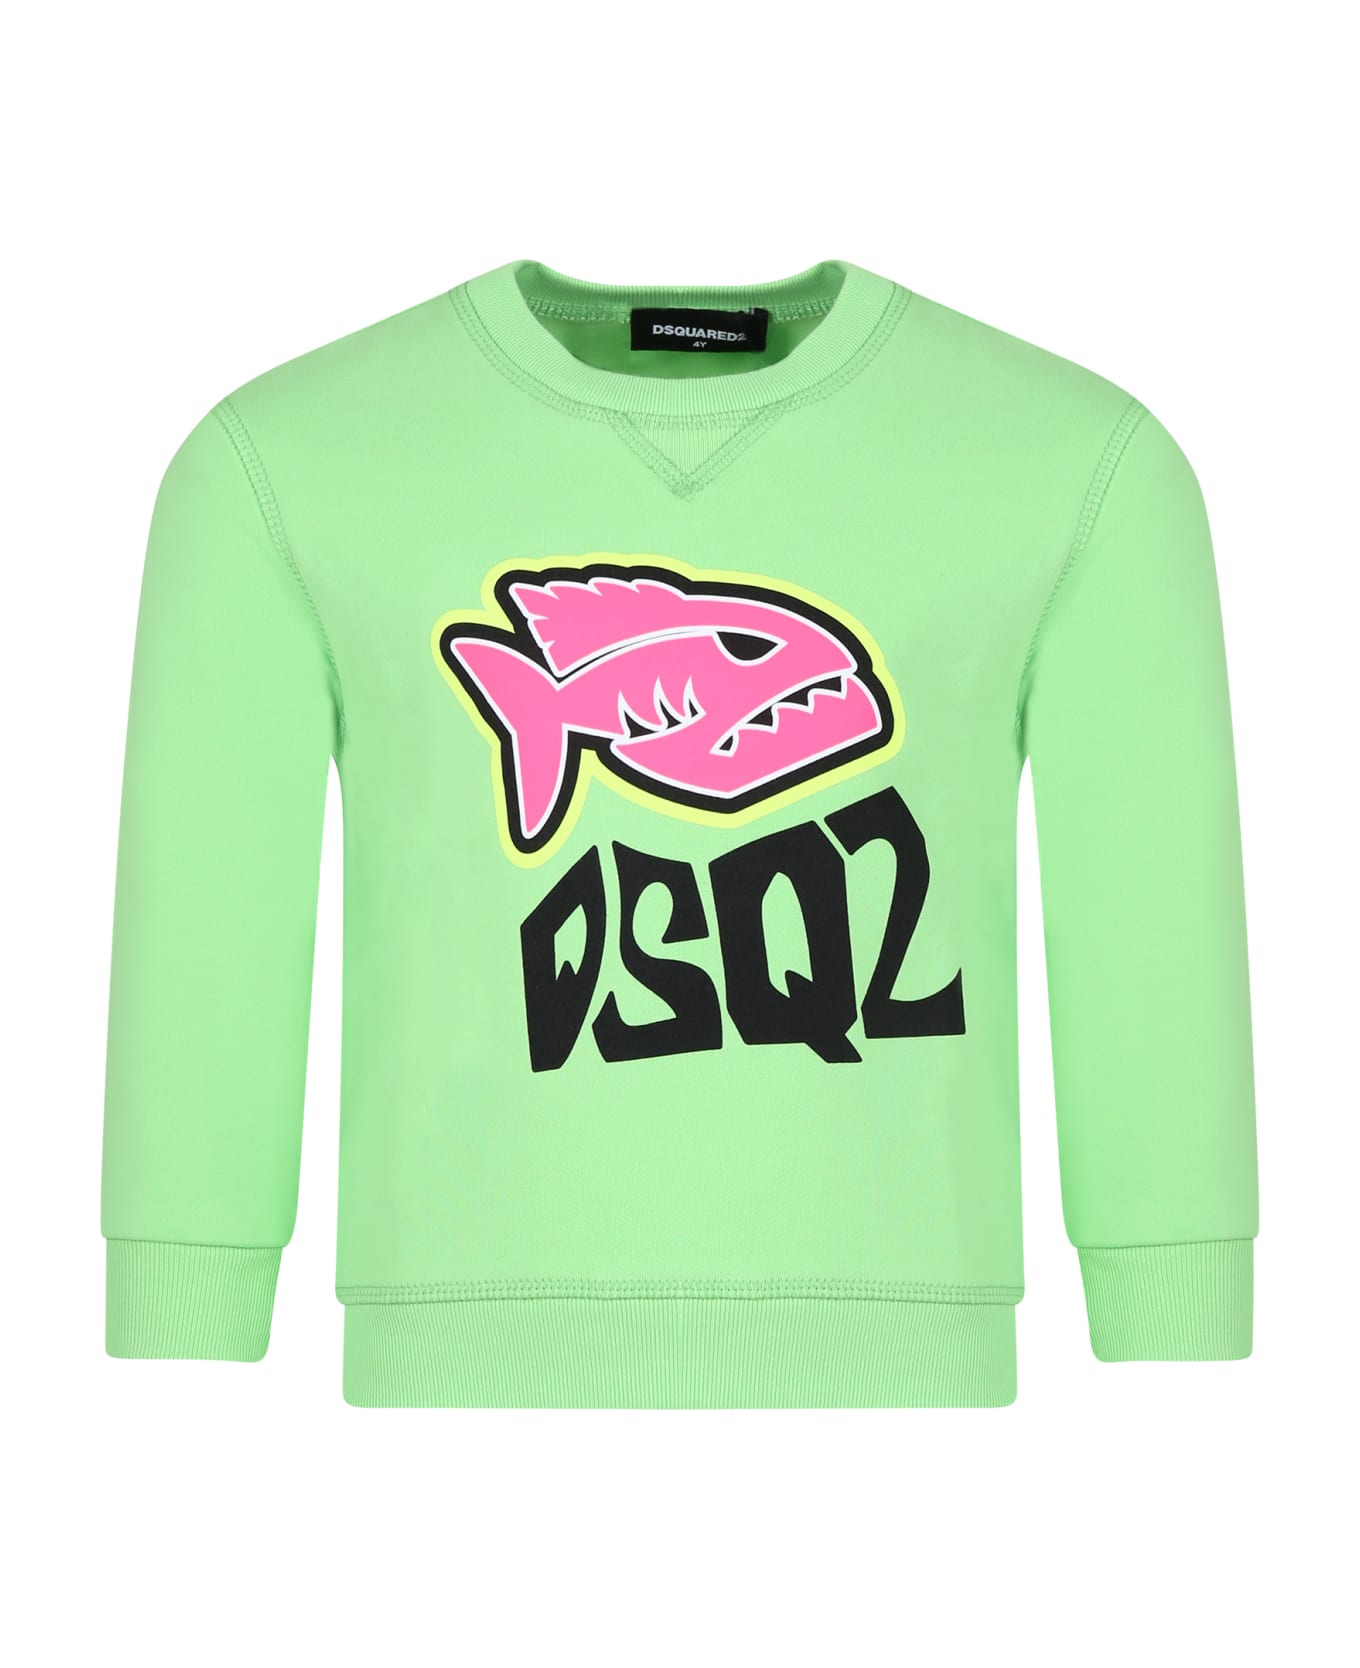 Dsquared2 Green Sweatshirt For Boy With Logo And Print - Green